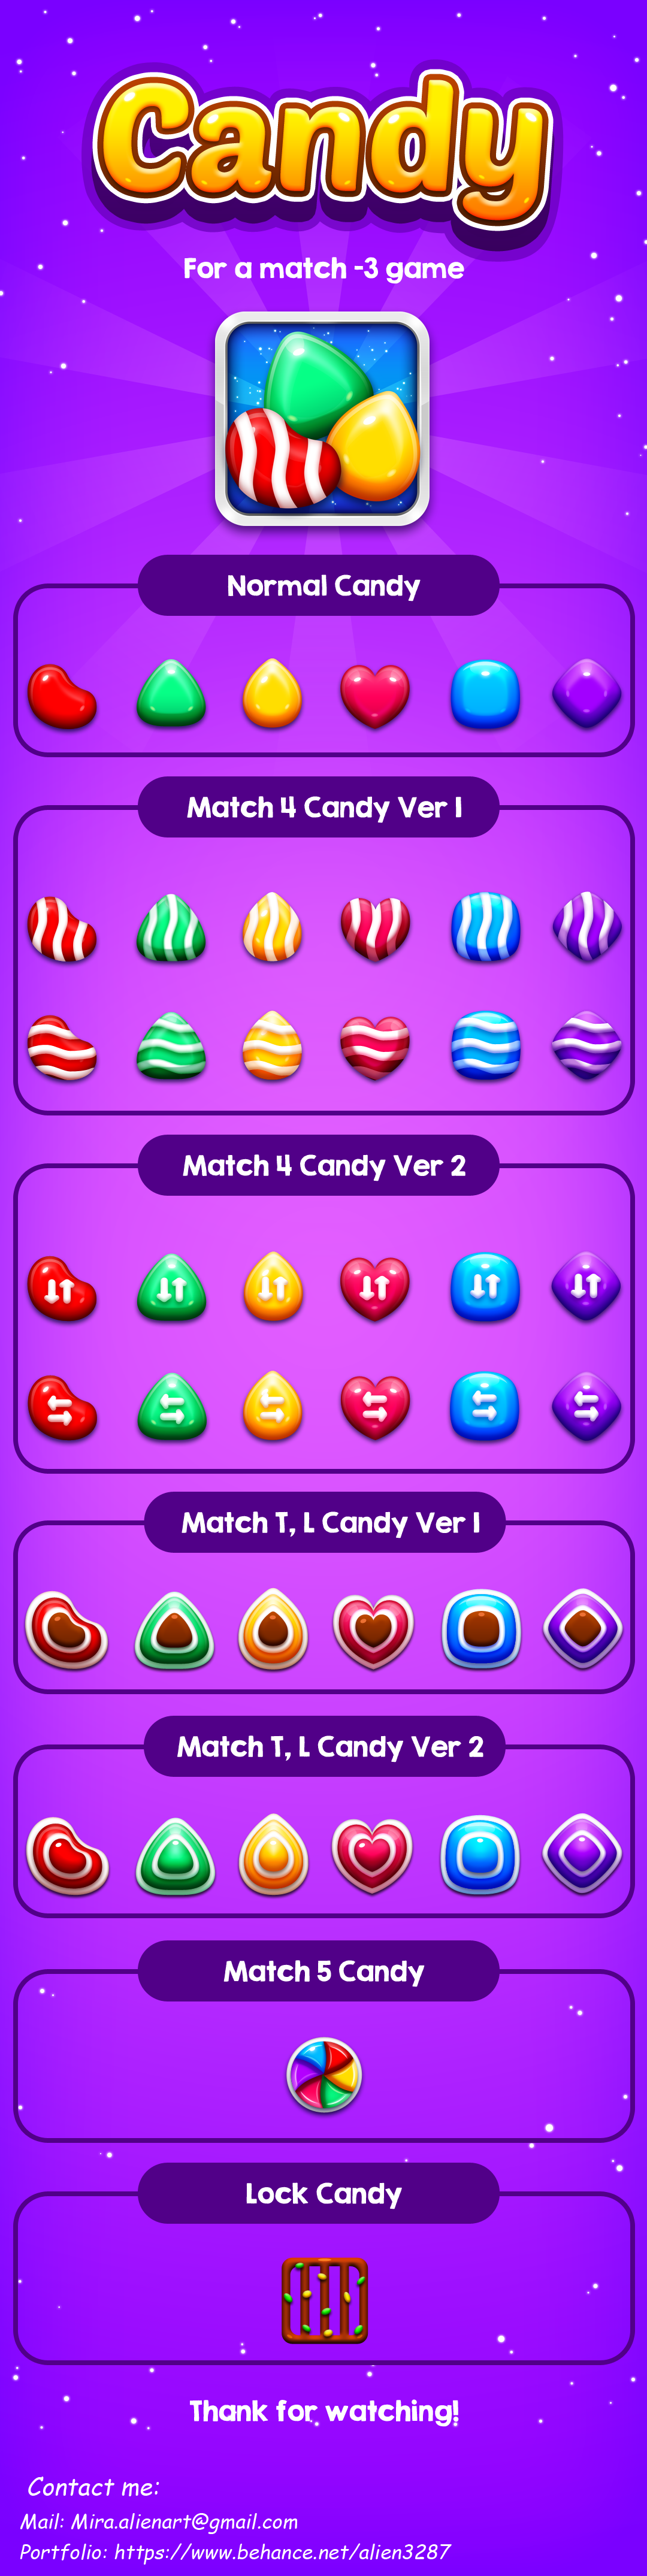 Candy game ui GUI UI CANDY CRUSH Candy Game match3 assets hanoi vietnam mobile game